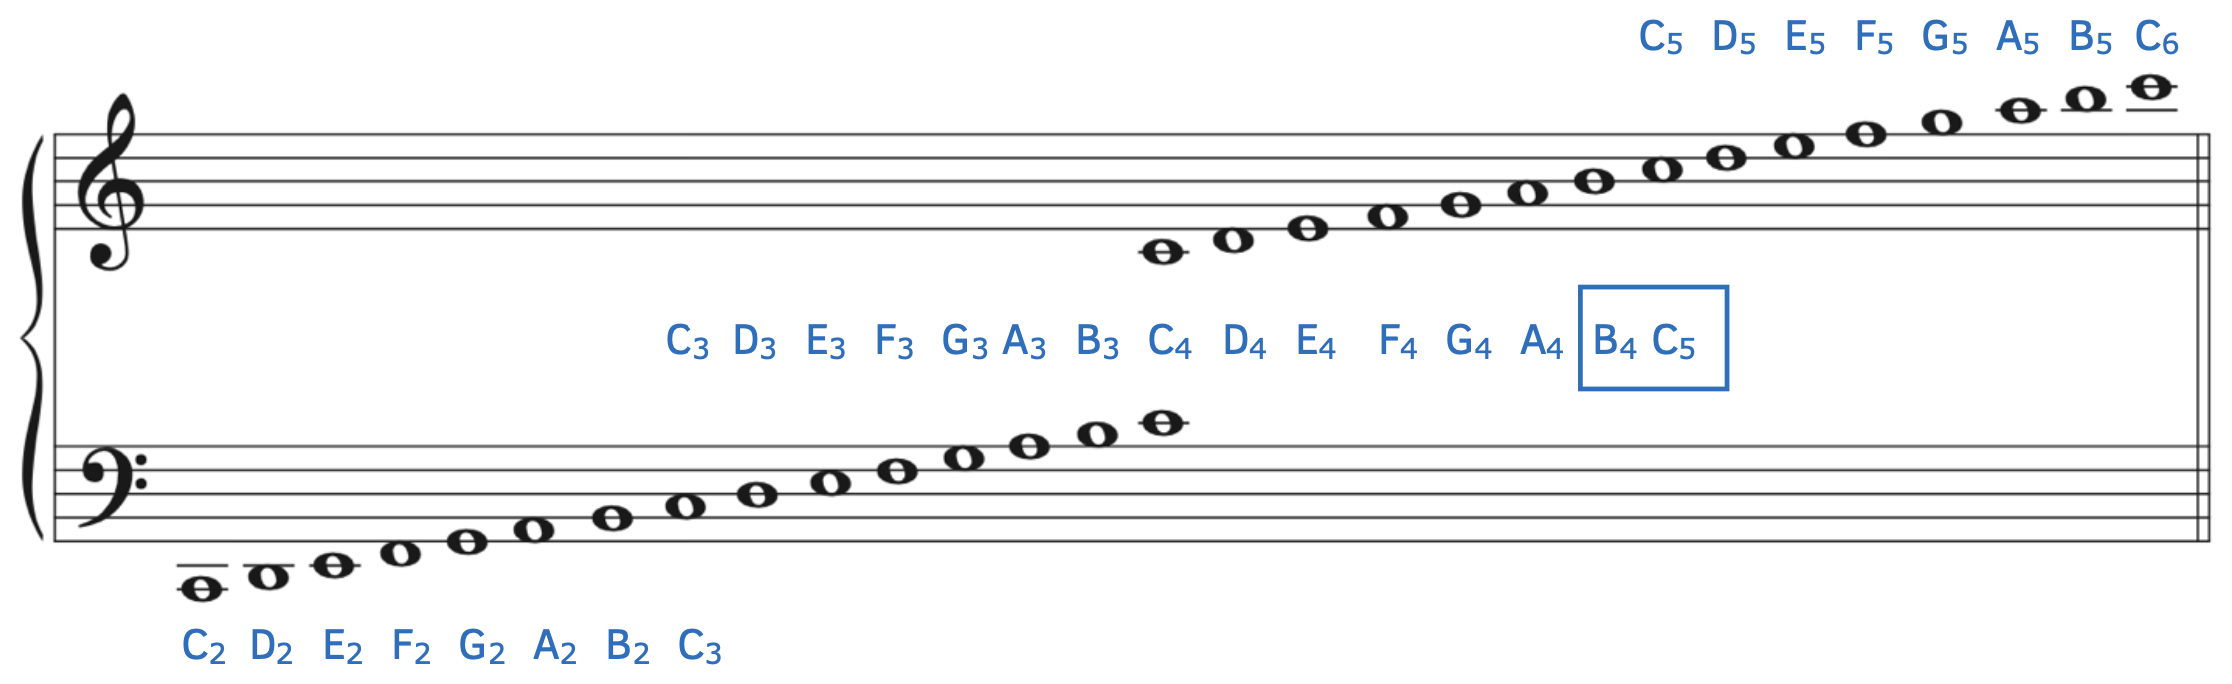 Pitches on the grand staff with octave designations. The lowest pitch has 2 ledger lines below the bass clef. This note is C2. The notes ascend C2, D2, E2, F2, G2, A2, B2 then C3. From there, C3 ascends to D3, E3, F3, G3, A3, B3 then C4. C4 is shown in both the bass clef and treble clef. In the treble clef, C4 ascends to B4, then C5 ascends to B5. The example ends with C6, which has two ledger lines above the staff. There is a box around B4 and C5 to show how octave designations change between B and C.